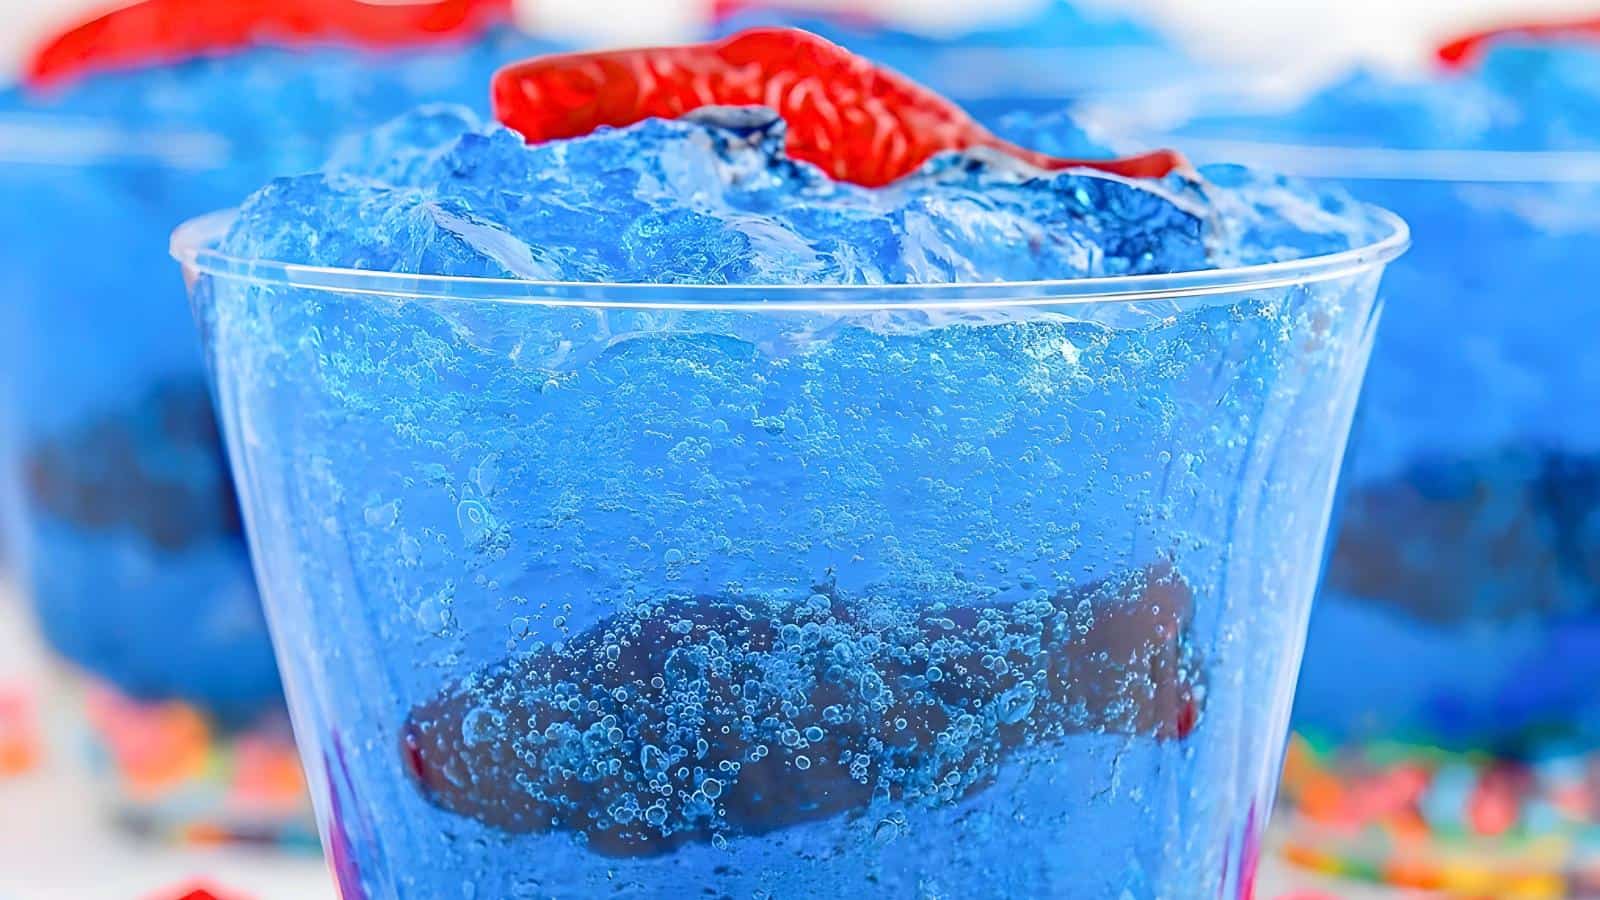 <p>These jello cups are a fun and creative snack, featuring a mini fish tank look that’s perfect for pool parties. Easy to assemble, they provide a visually appealing treat that kids and adults alike will enjoy. The individual servings make them convenient and easy to serve. Prepare them ahead of time and keep them chilled until the party starts. They add a whimsical touch to your snack selection, making them a hit at any fun pool party.<br><strong>Get the Recipe: </strong><a href="https://onmykidsplate.com/mini-fish-tank-gelatin-cups/?utm_source=msn&utm_medium=page&utm_campaign=msn" rel="noopener">Mini Fish Tank Jell-O Cups (Fun For Parties!)</a></p>